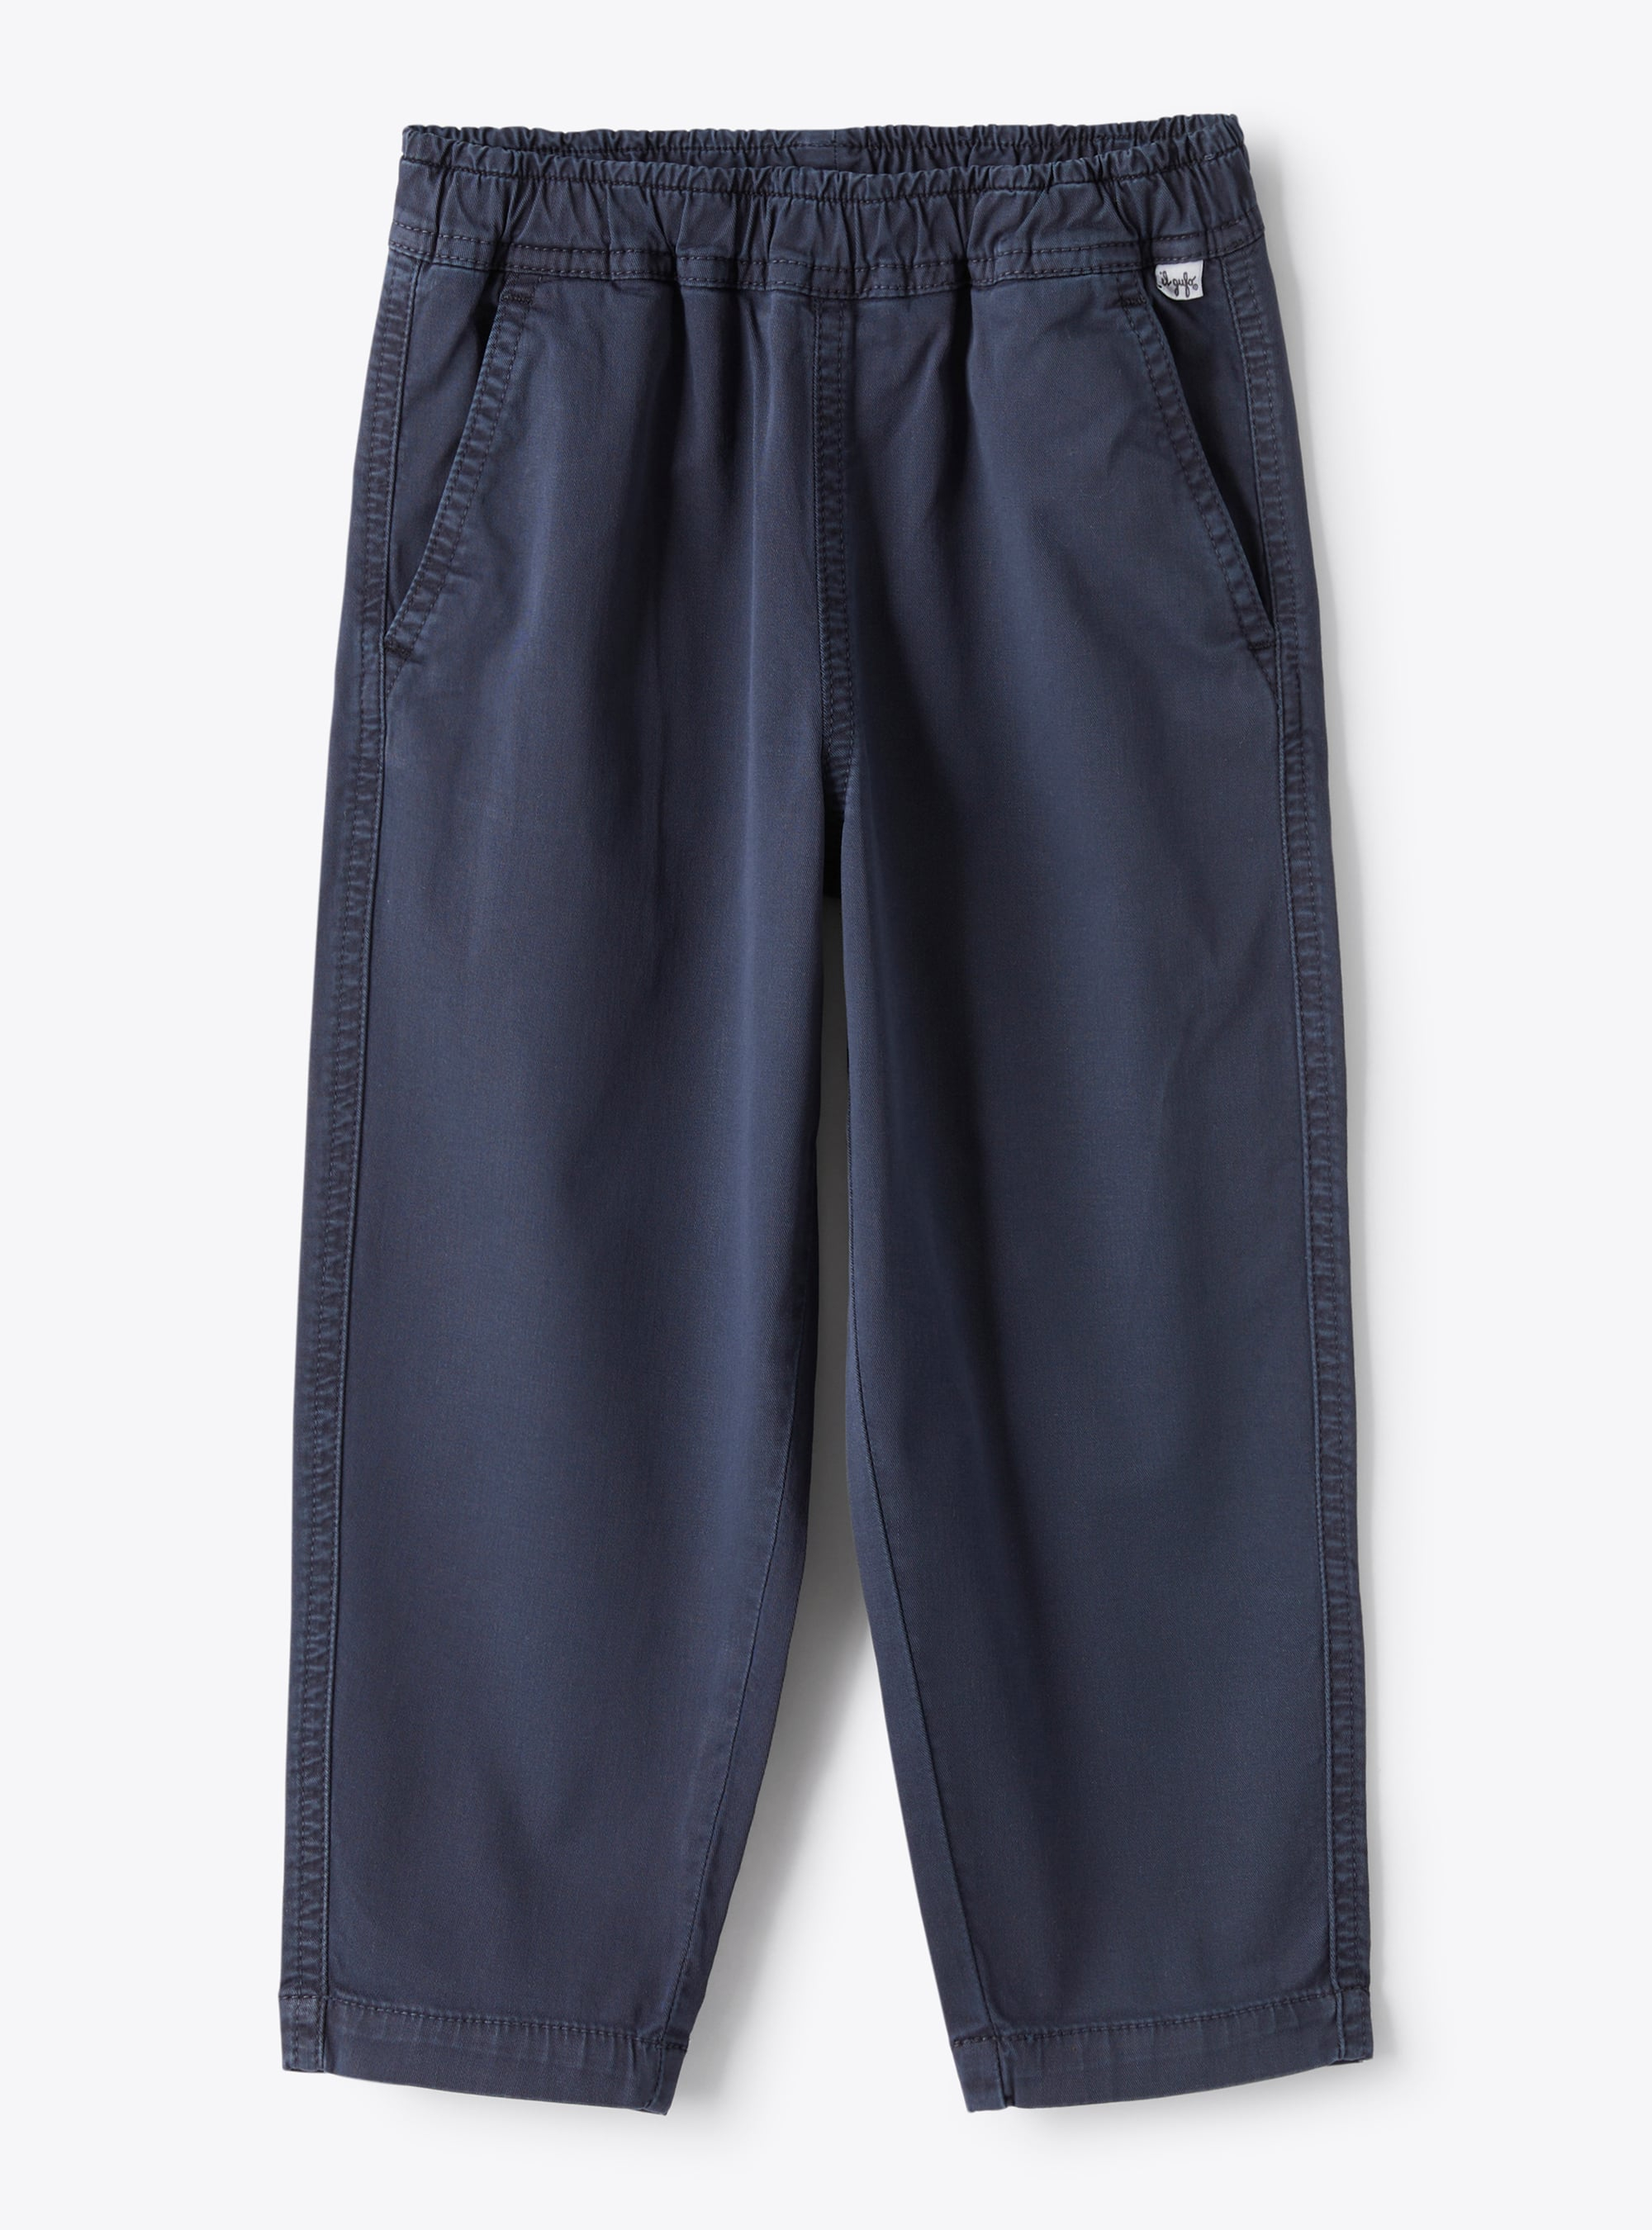 Long trousers in navy-blue garment-dyed gabardine - Trousers - Il Gufo